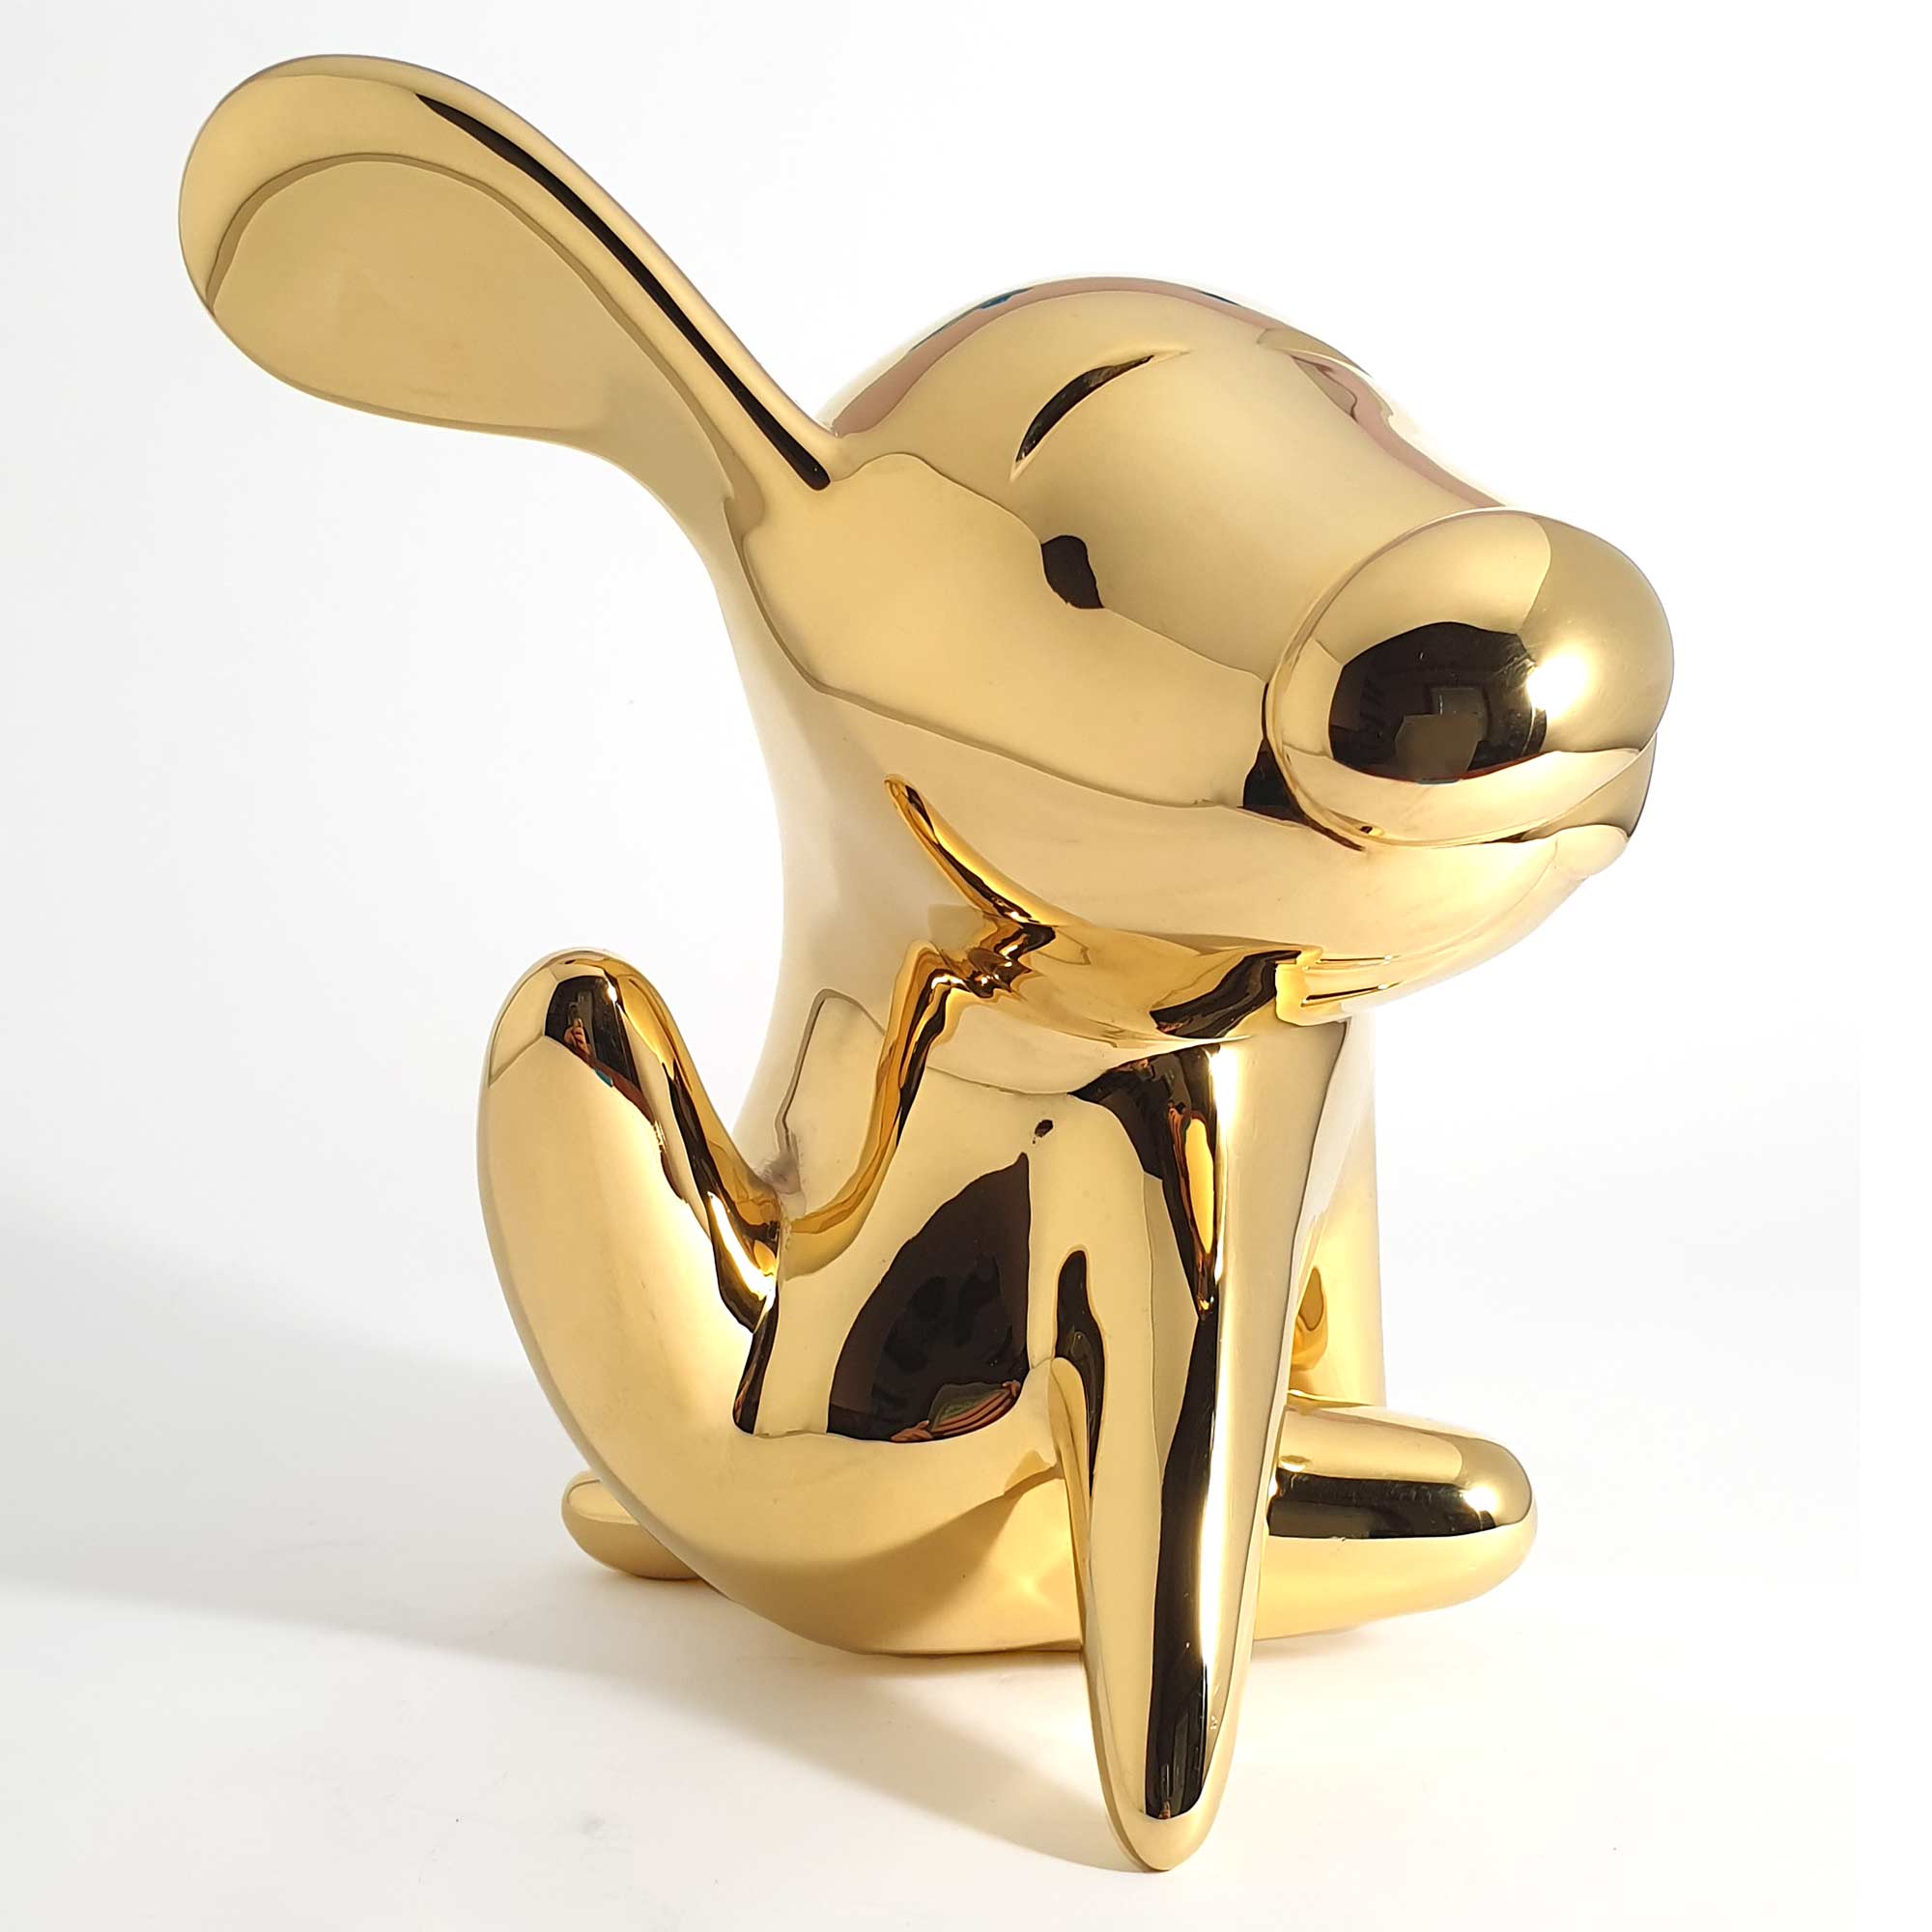 The itch, dog sculpture, Gold Mirror Polished Stainless Steel Sculpture, by artist Ferdi B Dick, hero view